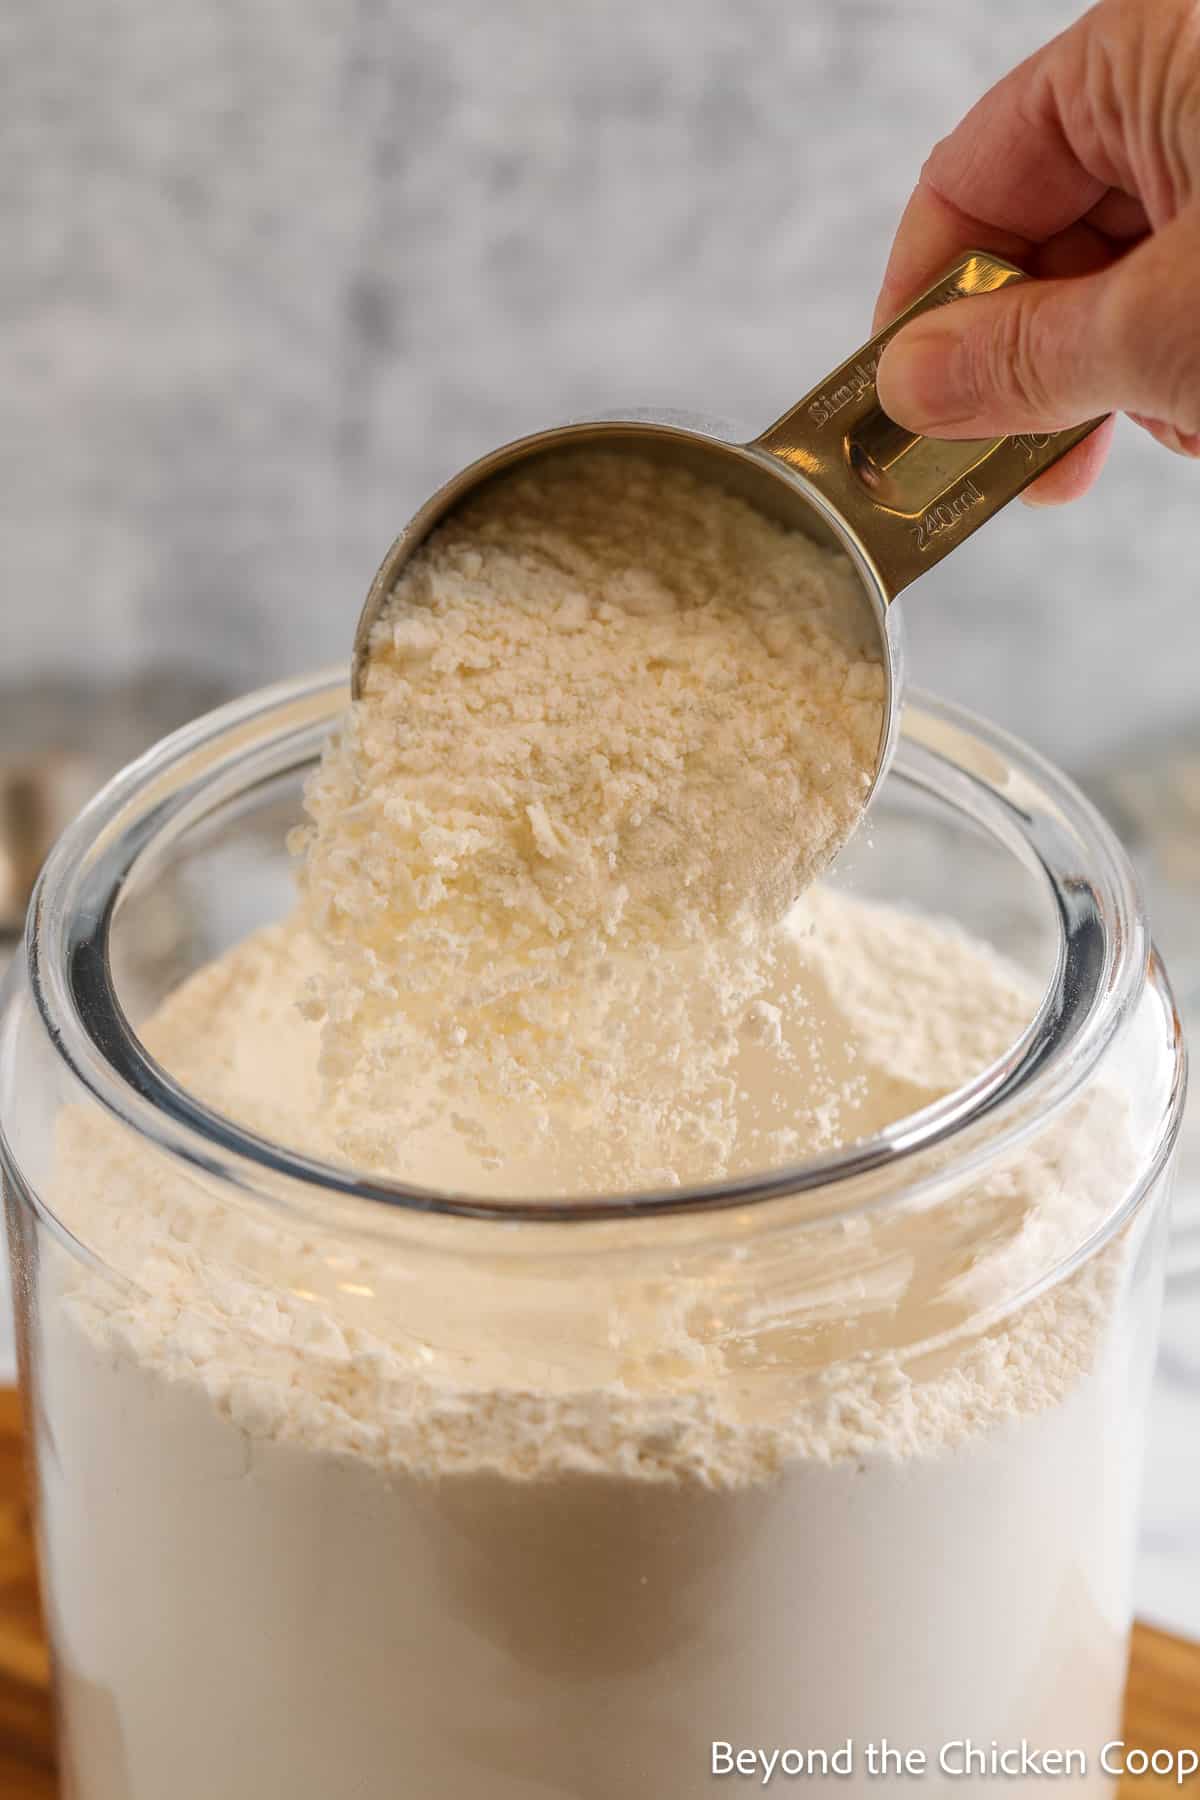 Fluffing flour in a container with a scoop.